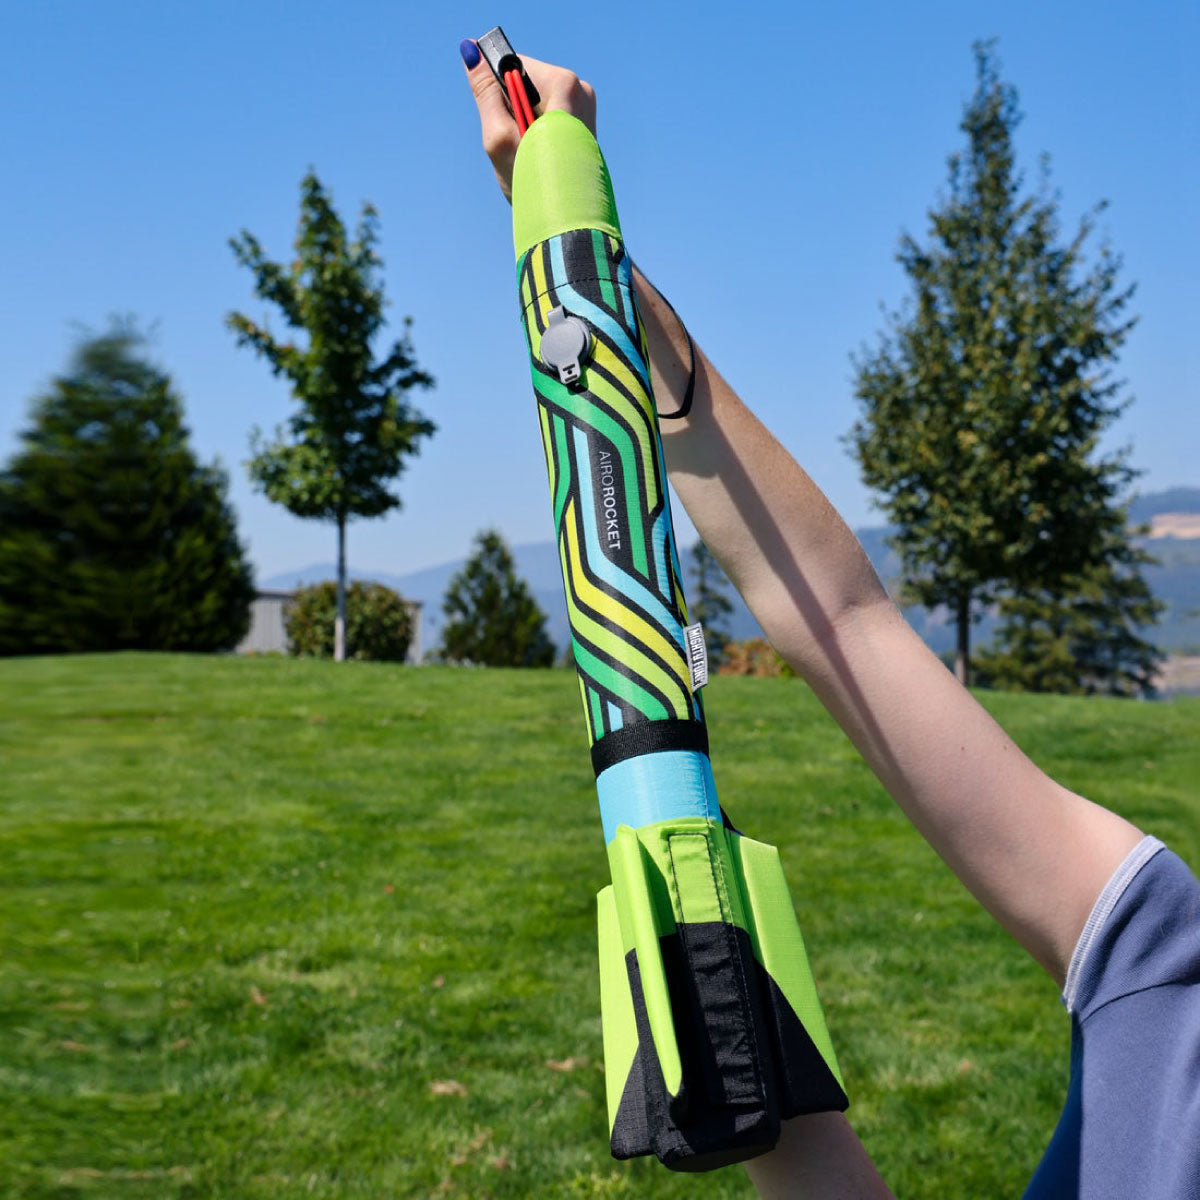 Super Fly Airo Rockets from Mighty Fun